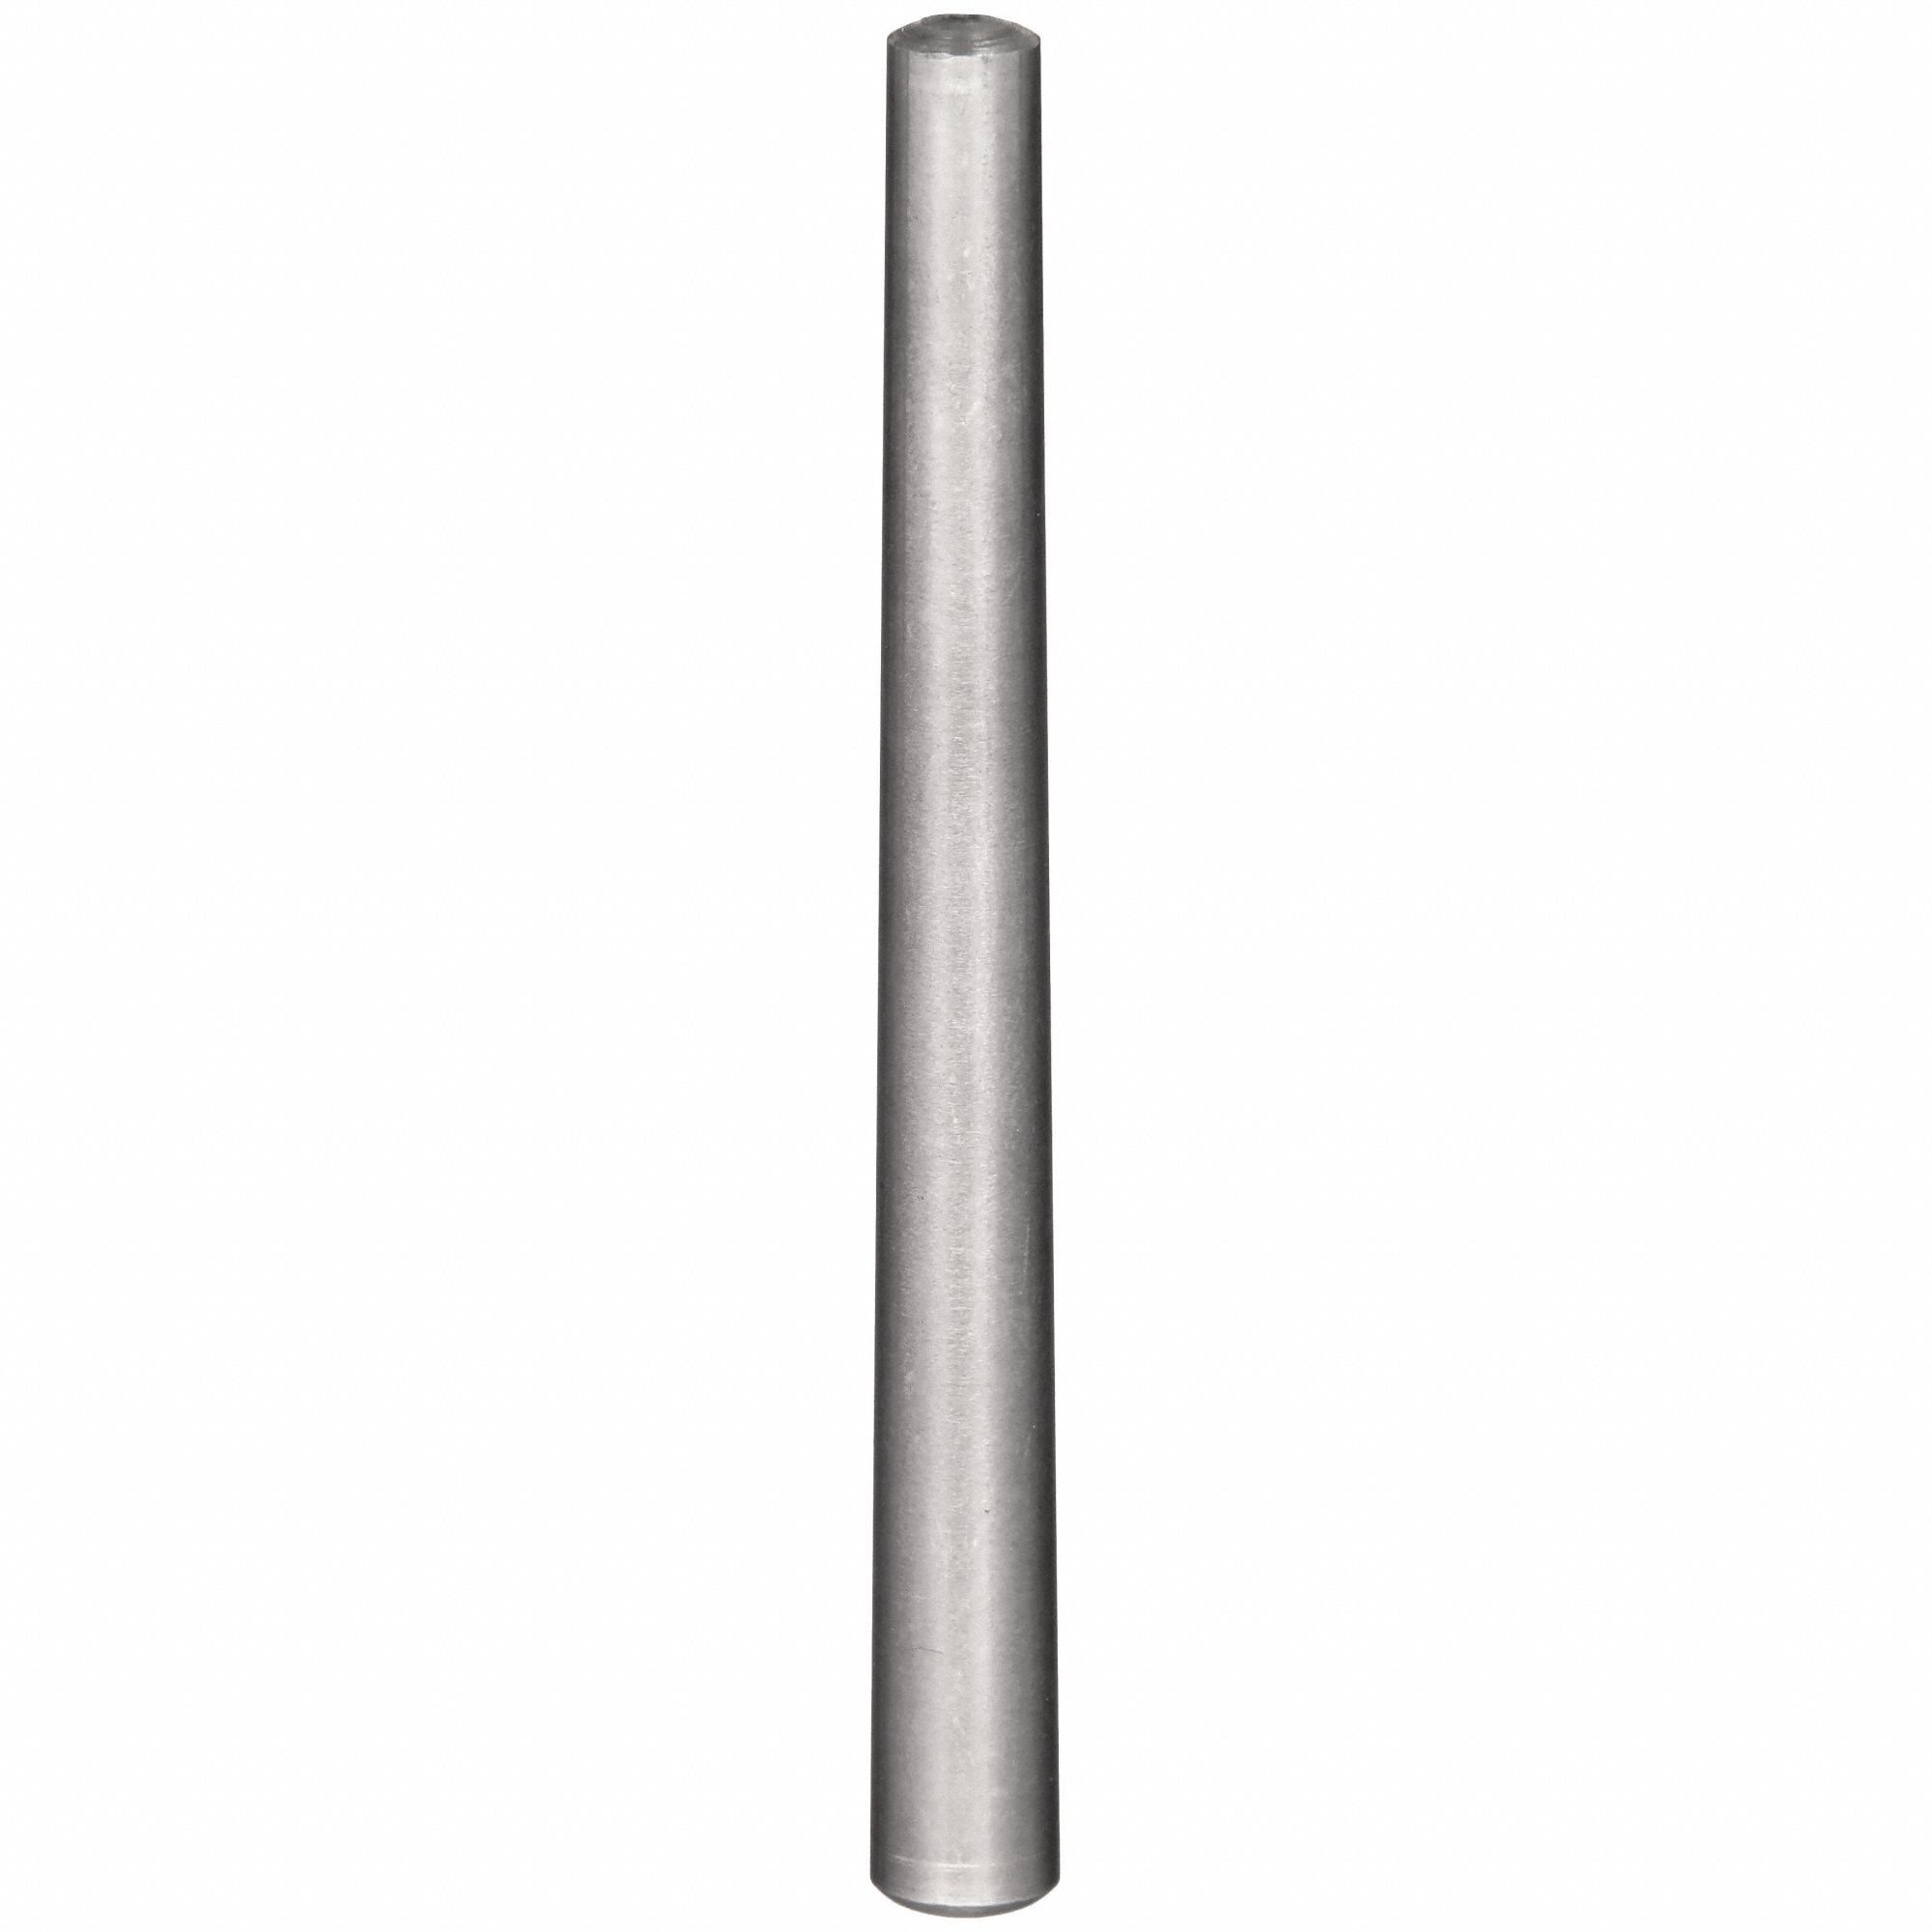 TAPER PIN, 0.707 IN DIA, STEEL, INCH, STD, #10 PIN SIZE, 4 IN SHANK L, 0.707 IN LARGE END DIA